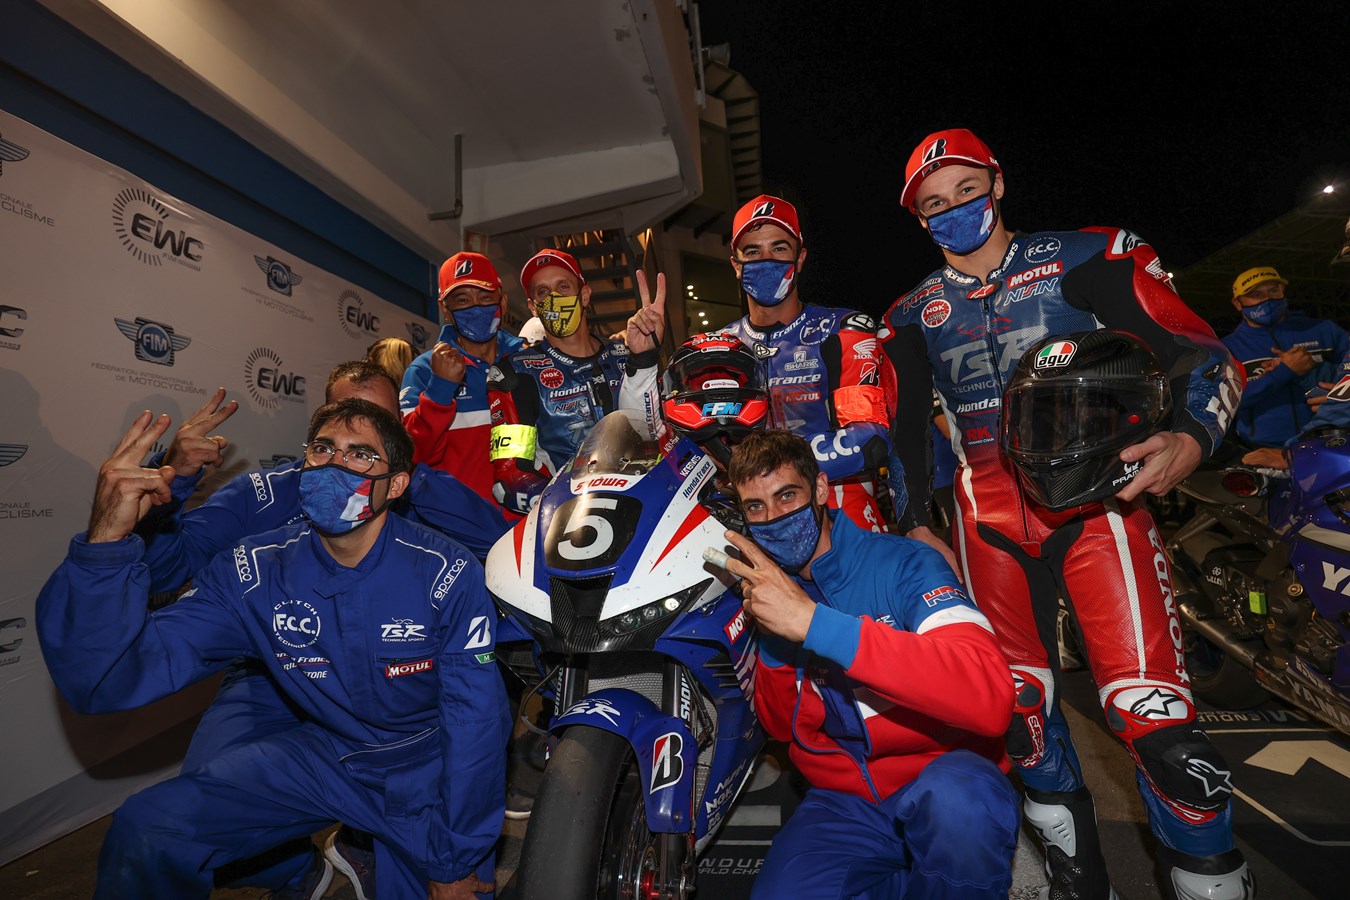 Second place for F.C.C. TSR Honda France at the 12 Hours of Estoril